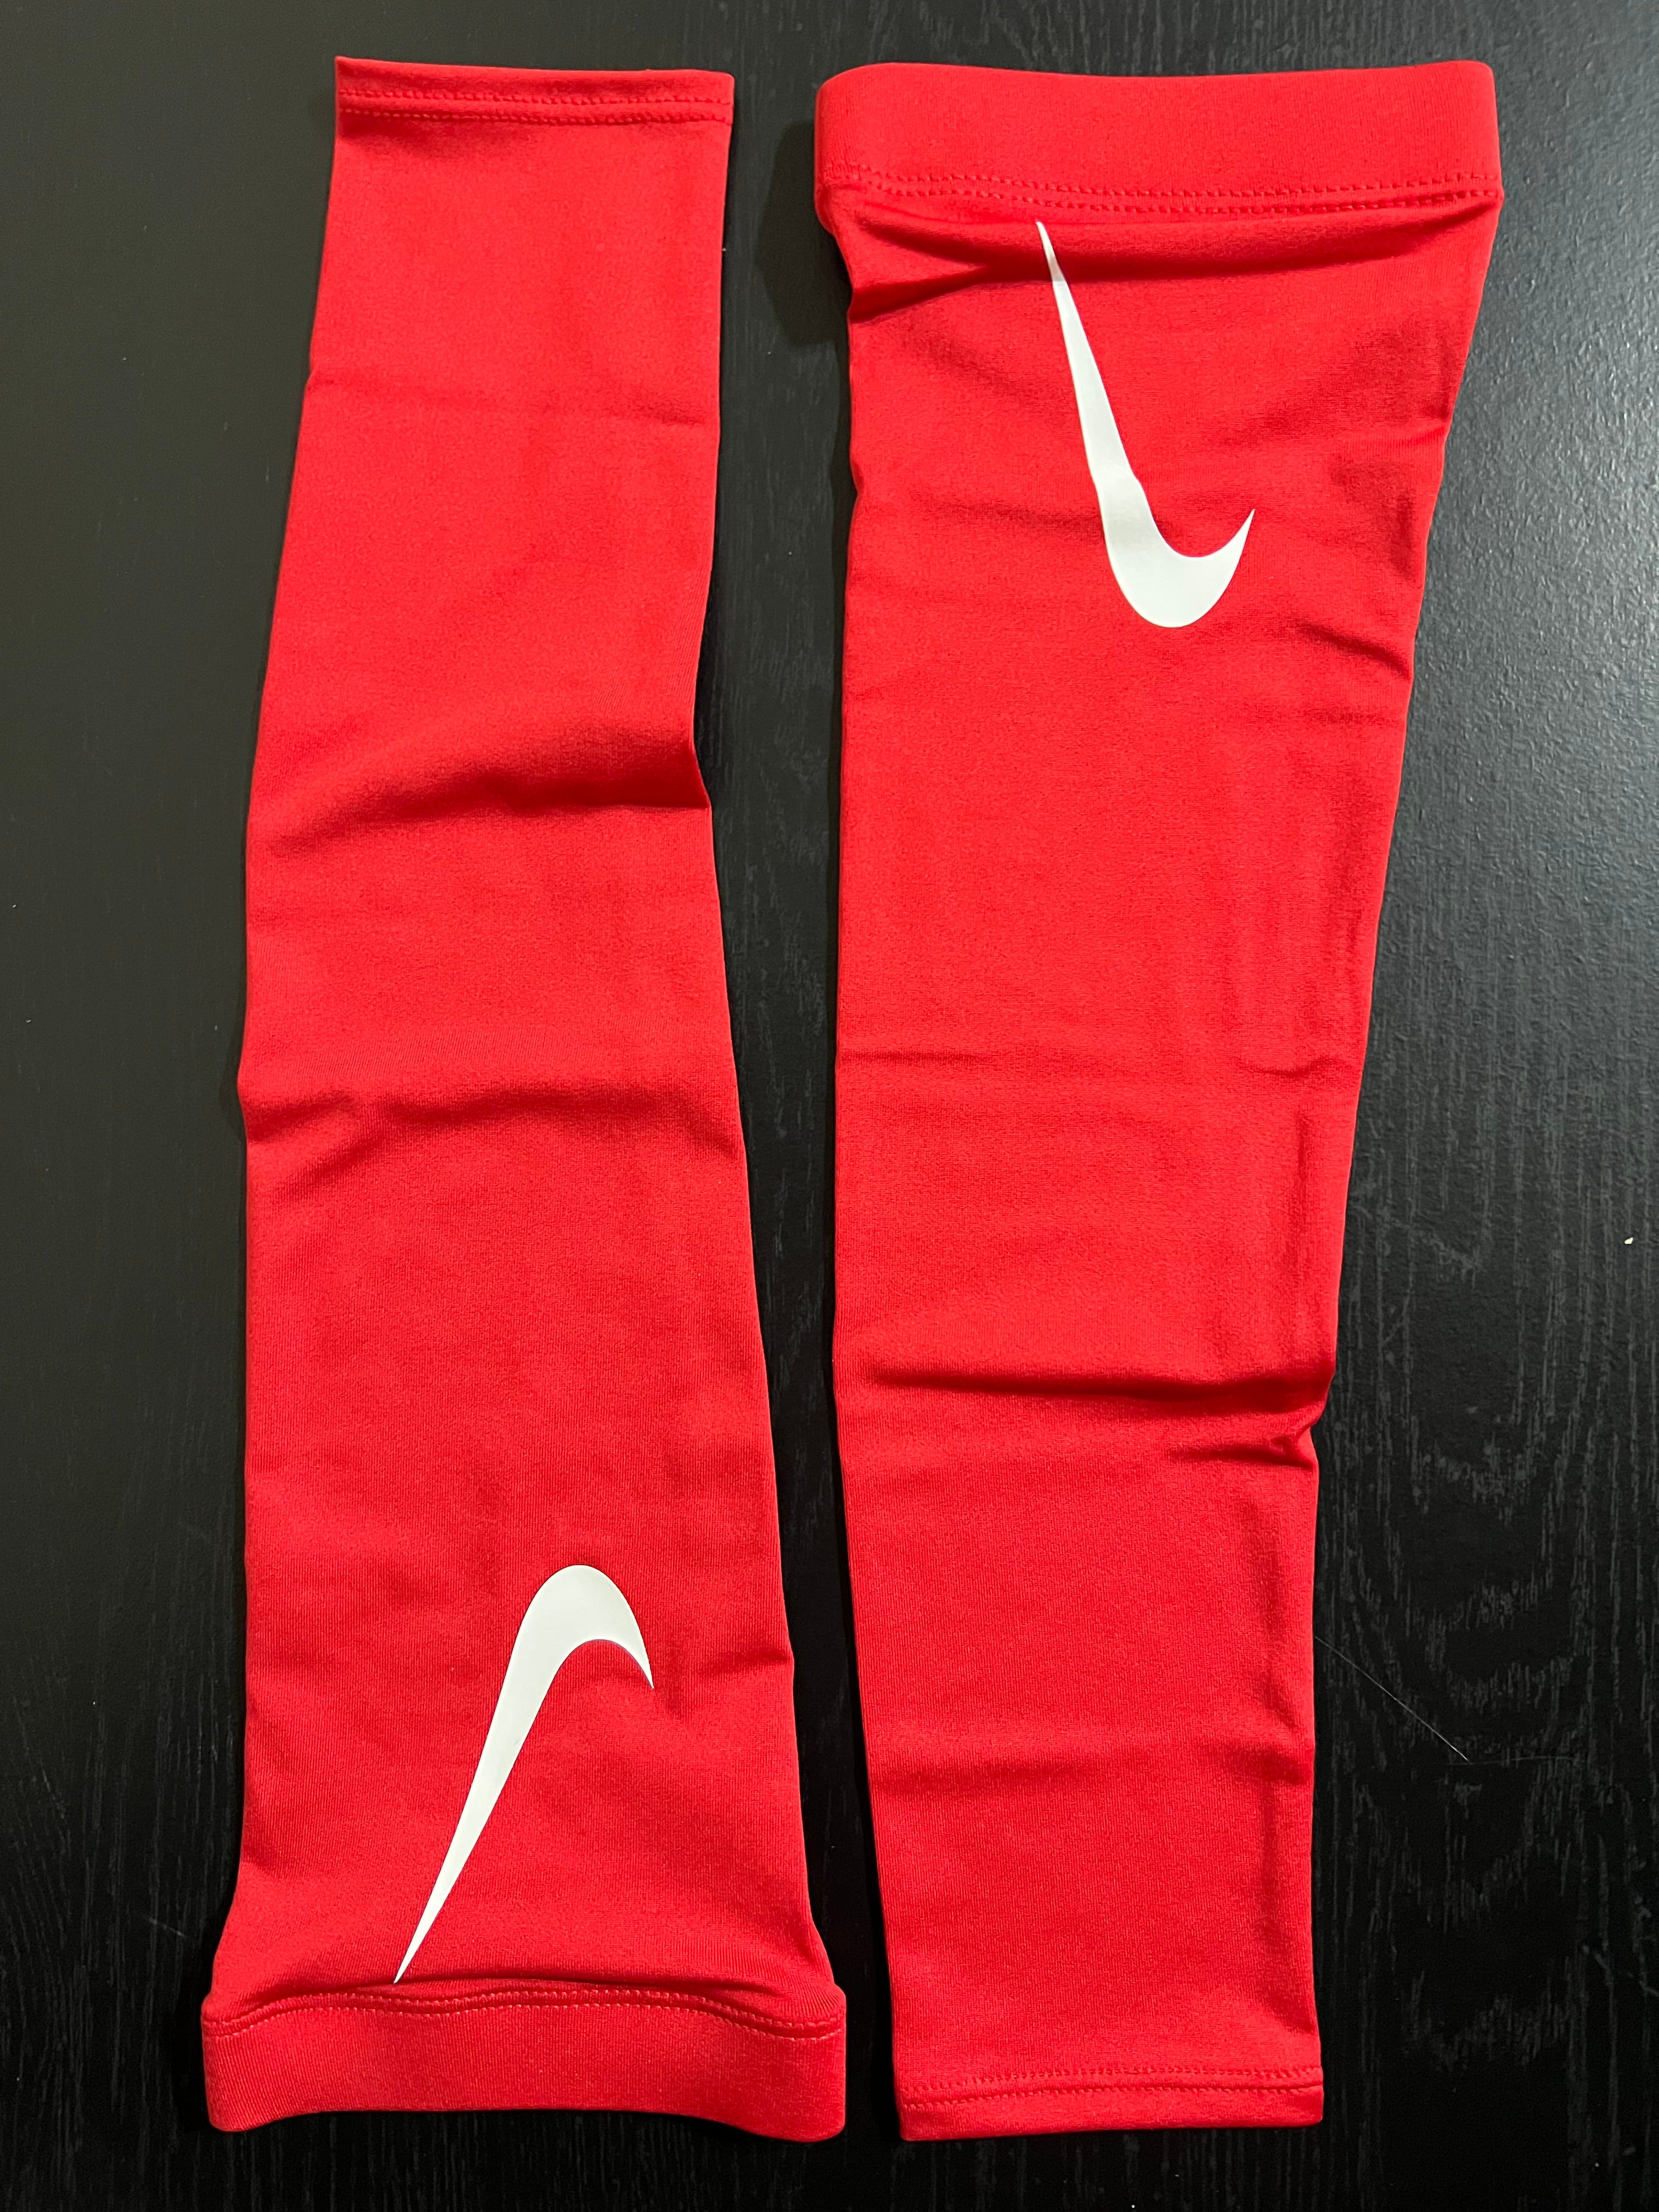 NIKE PRO FOOTBALL SLEEVES W/ DRI-FIT WHITE ONE PAIR S/M NEW IN BOX